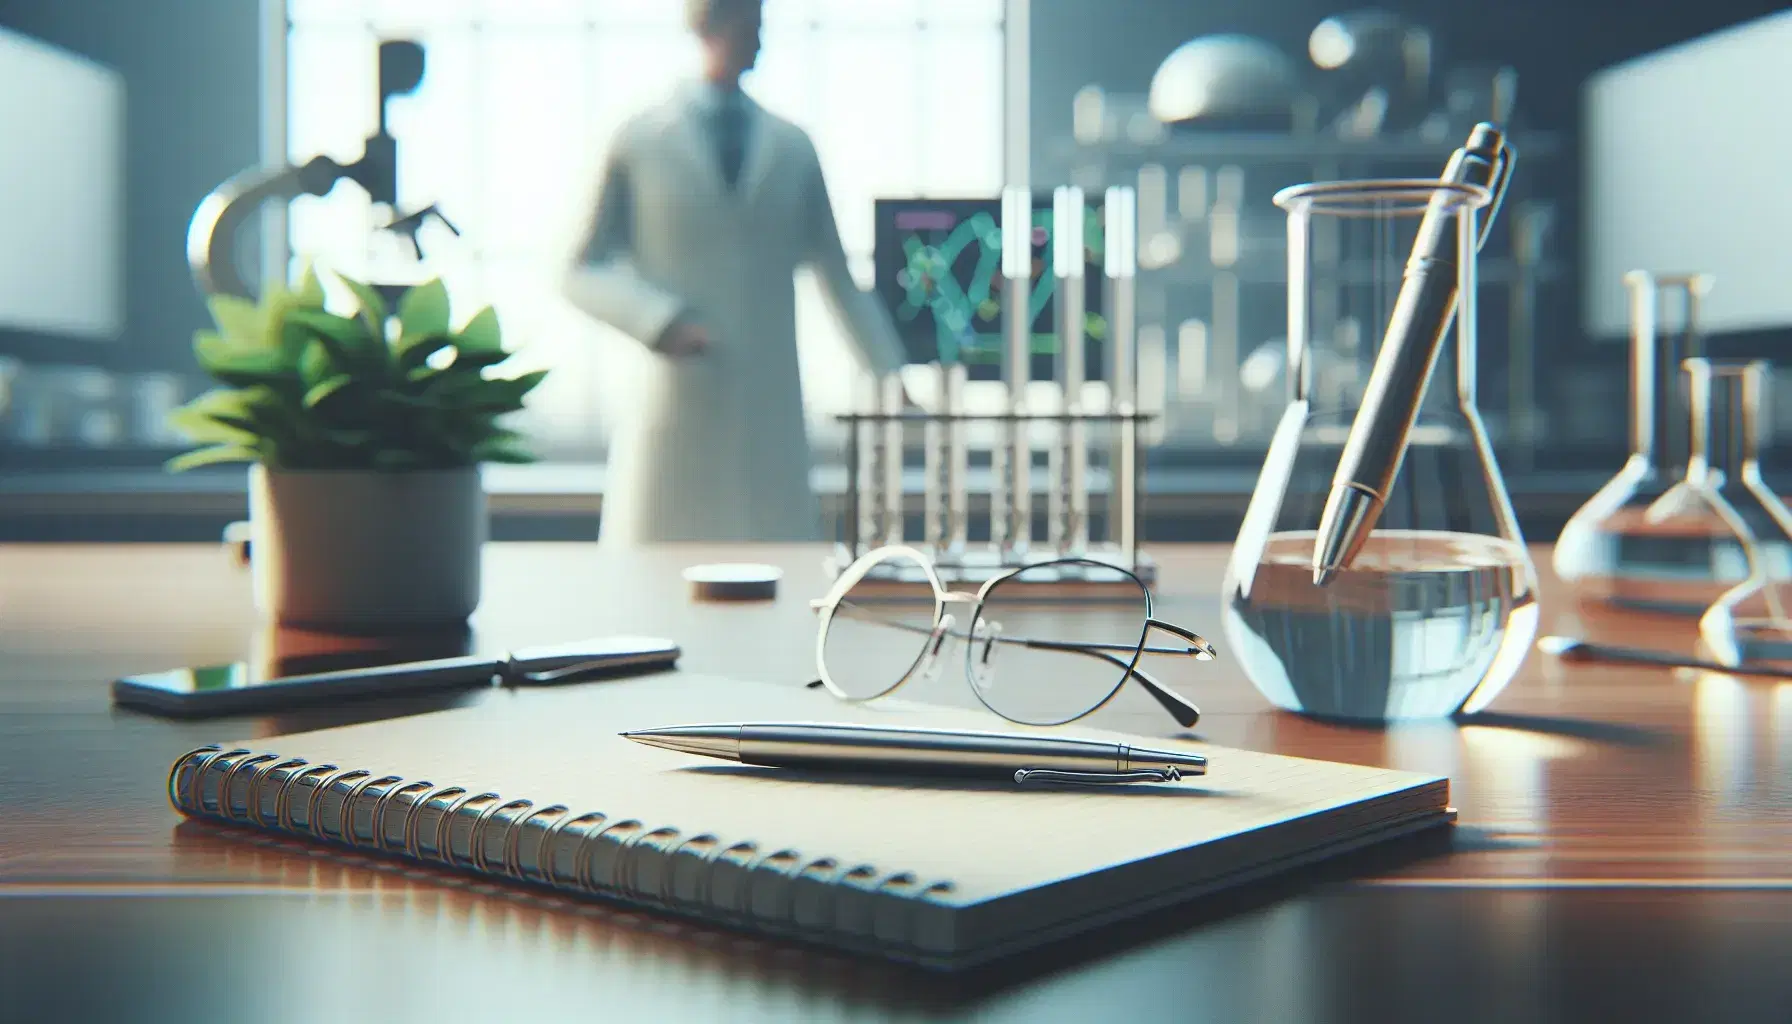 Laboratory scene with a notebook, pen, eyeglasses, and beaker on a table, and a scientist analyzing graphs on a computer in the background.